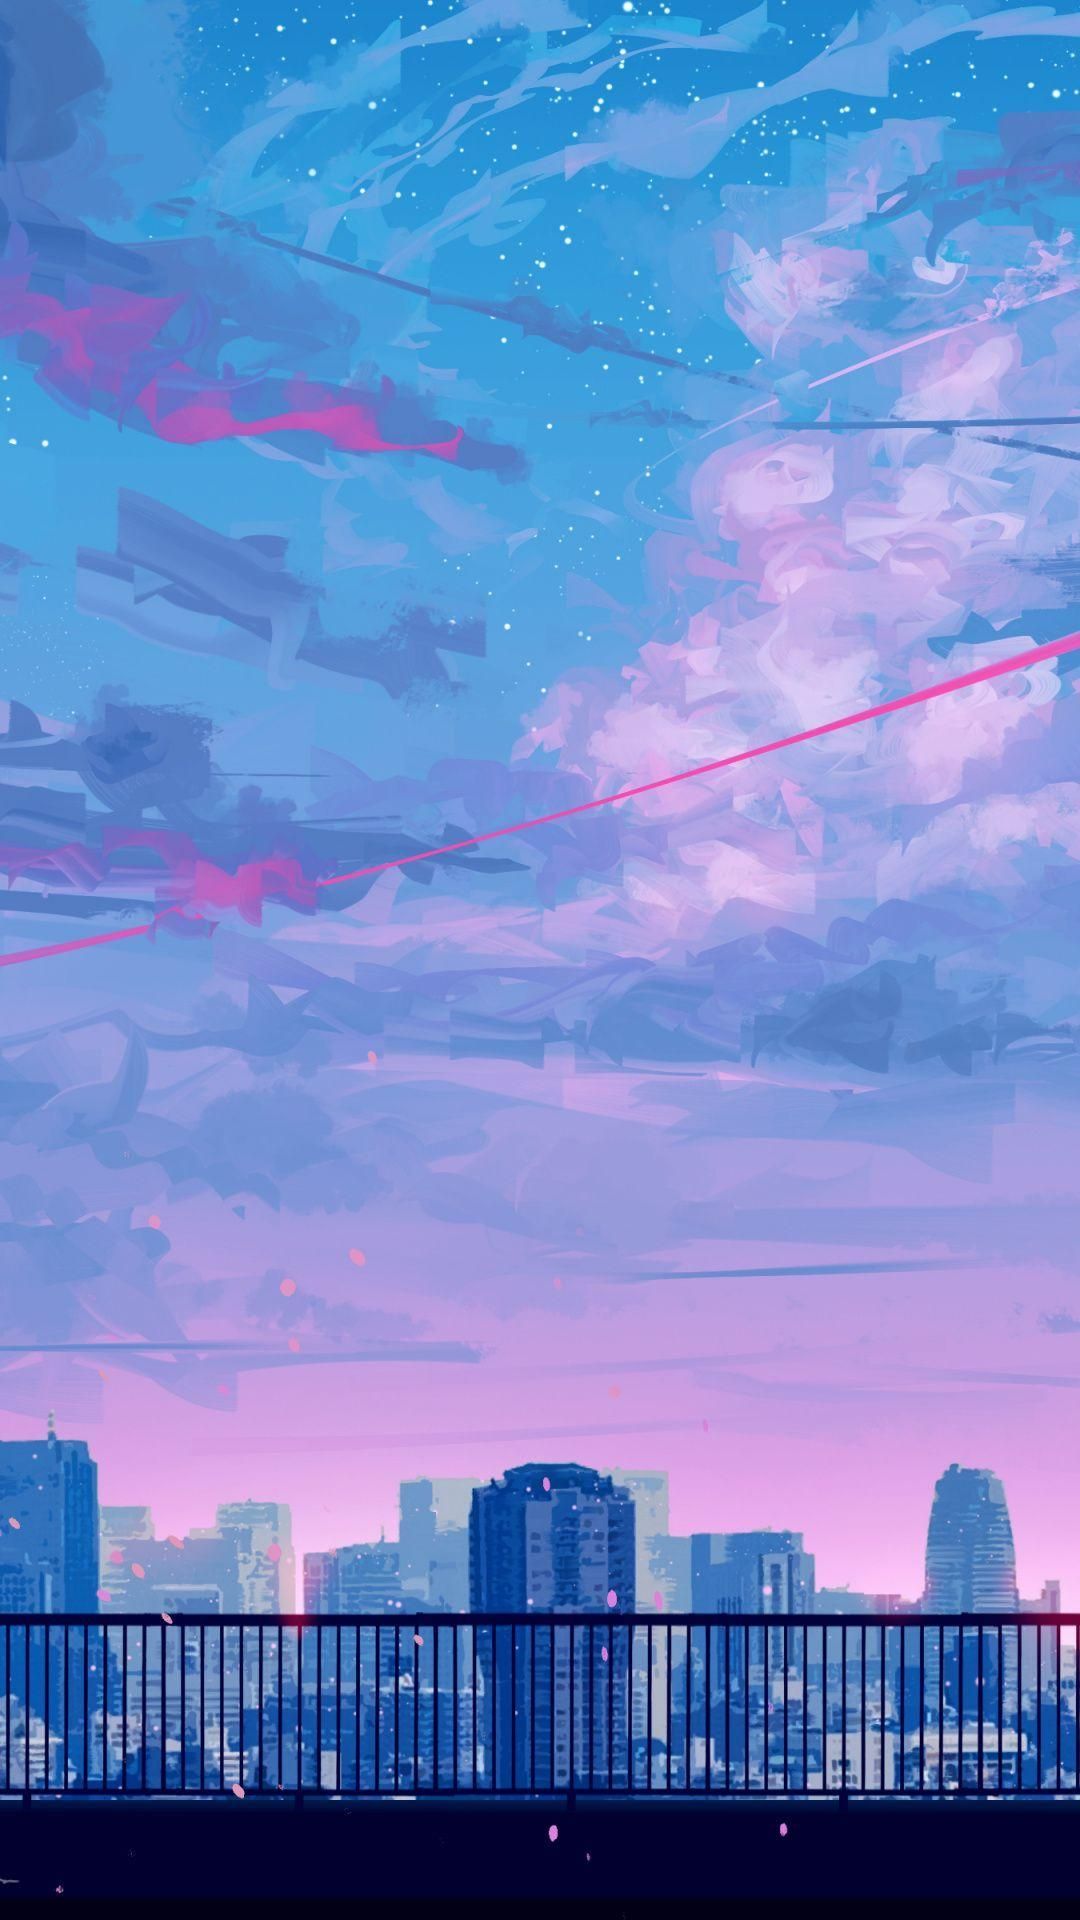 Aesthetic Pink And Blue Background Picture. Scenery wallpaper, Anime scenery wallpaper, Anime scenery